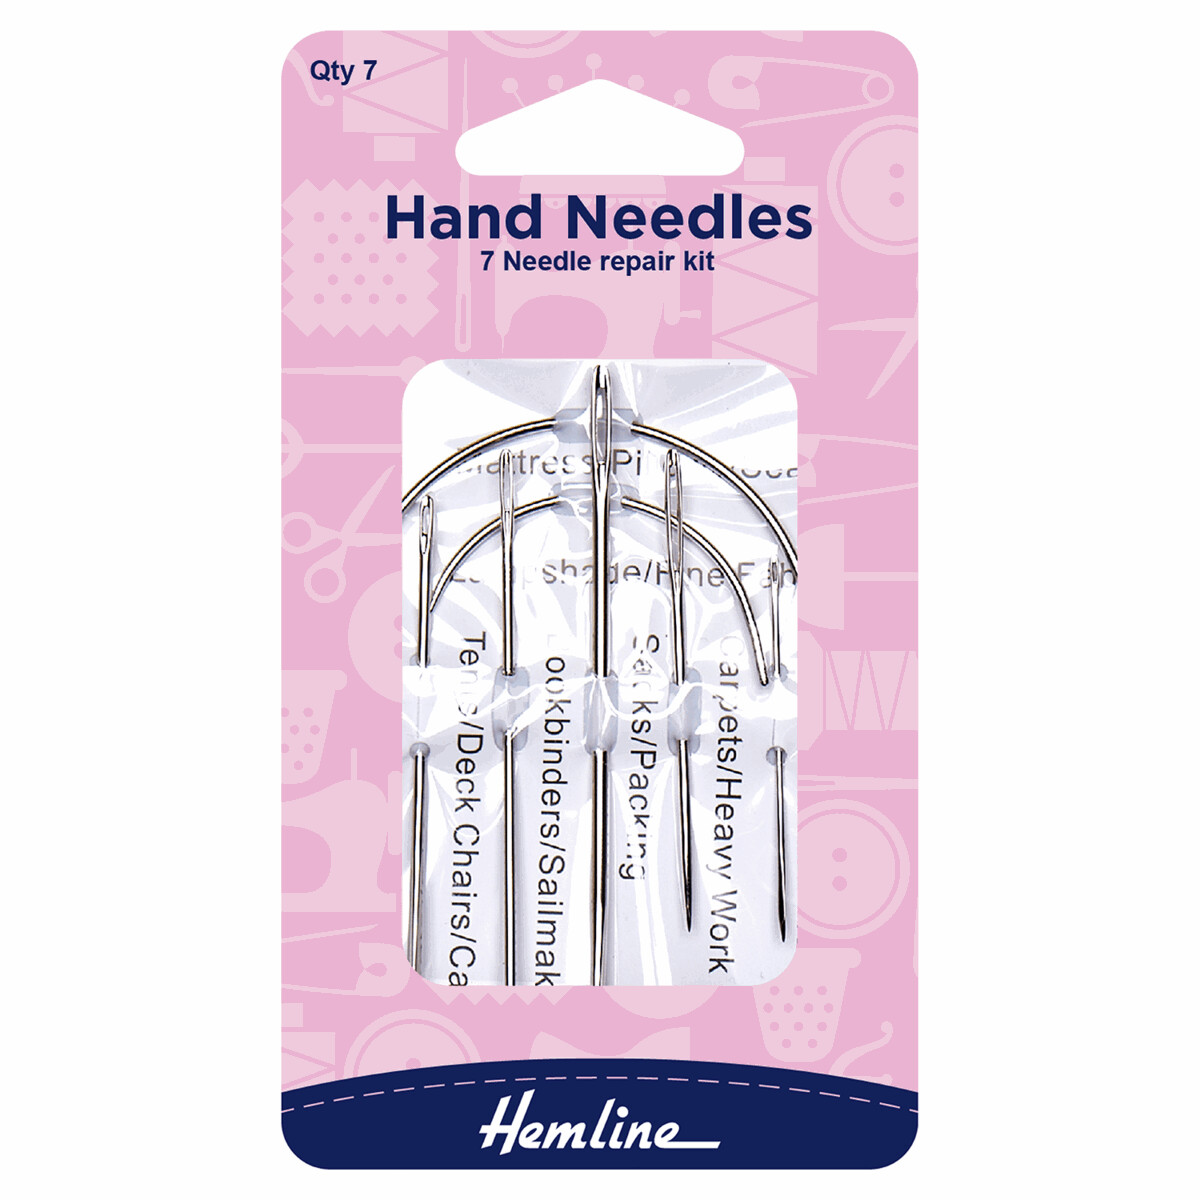 Hand Sewing Needles: Repair: 7 Pieces